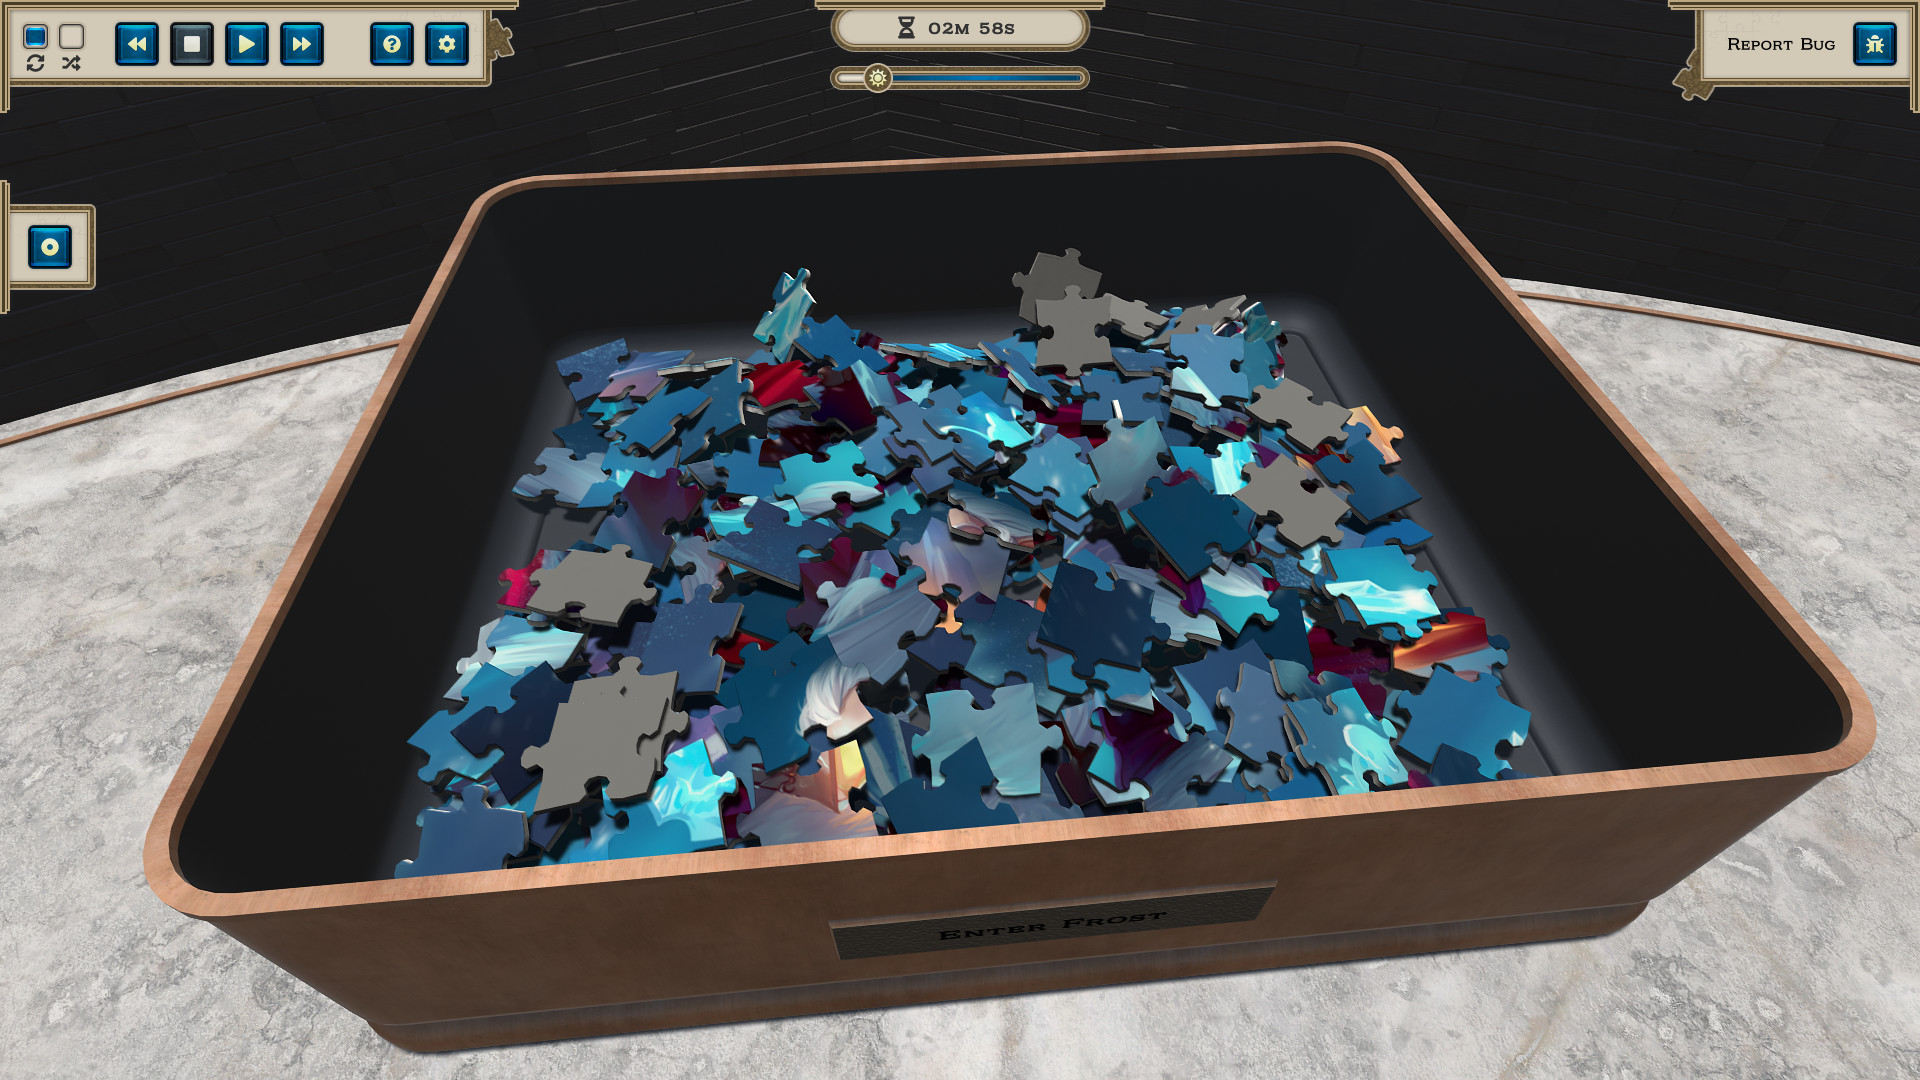 Masters of Puzzle - Christmas Edition: Enter Frost screenshot